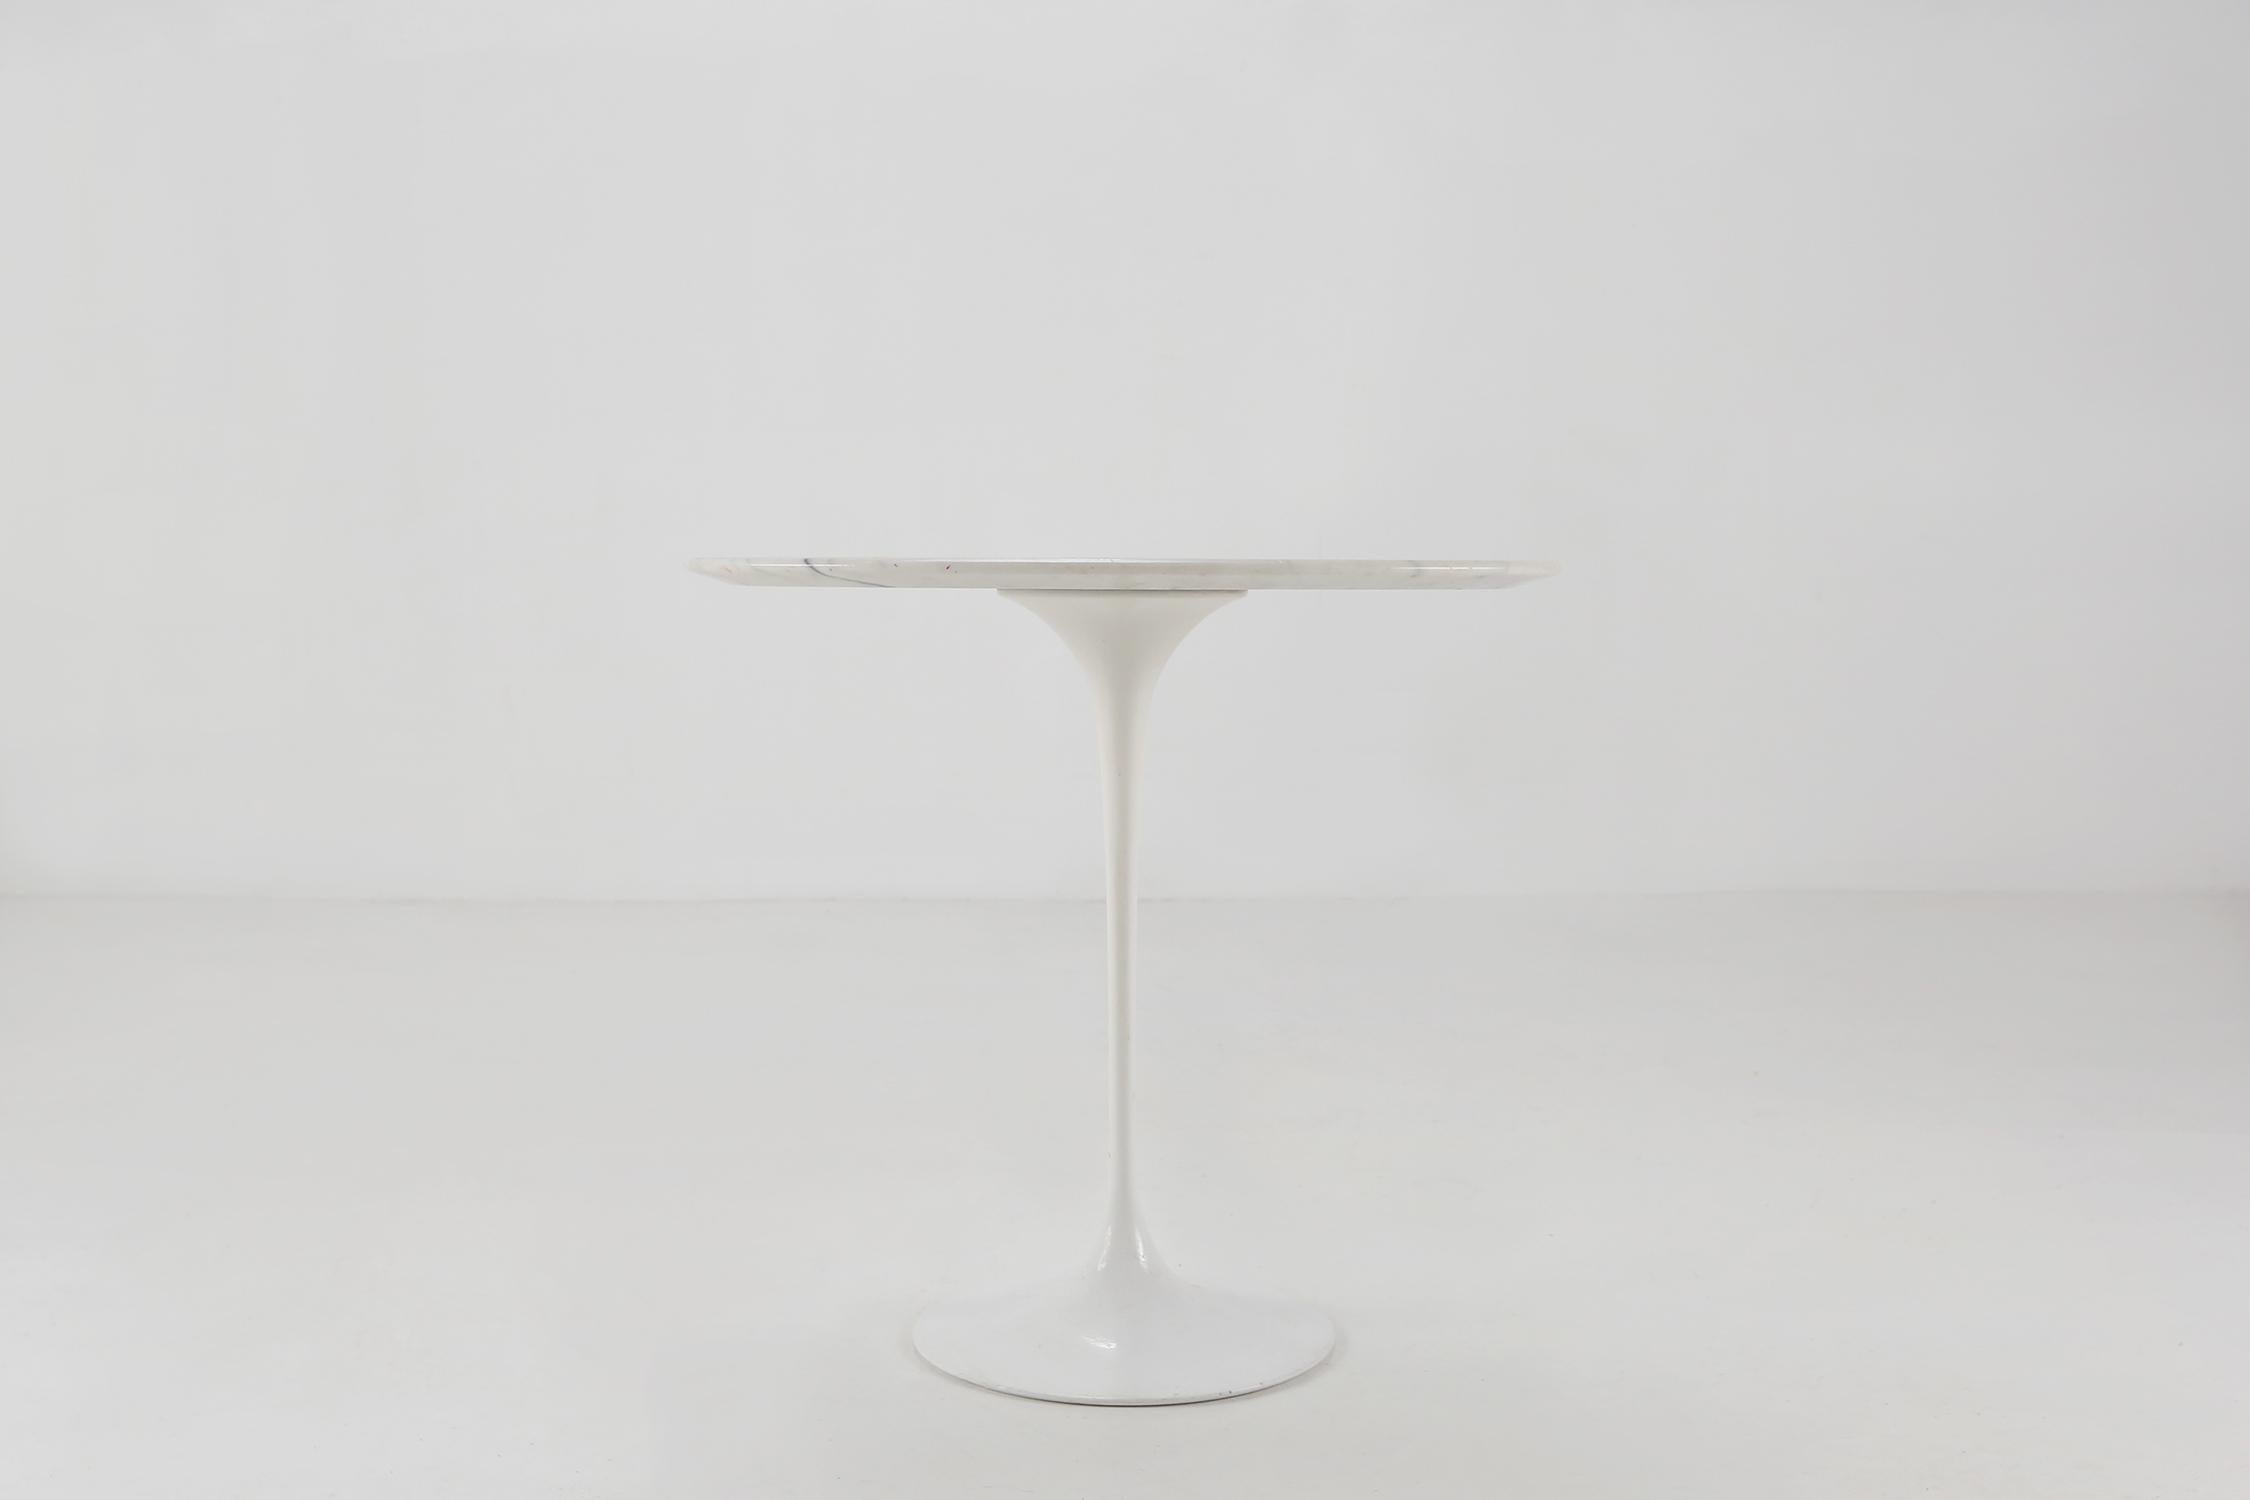 Oval side table by designer Eero Saarinen for Knoll International Ca.1970.
In a good vintage condition with some small damage on the epoxy protective layer.